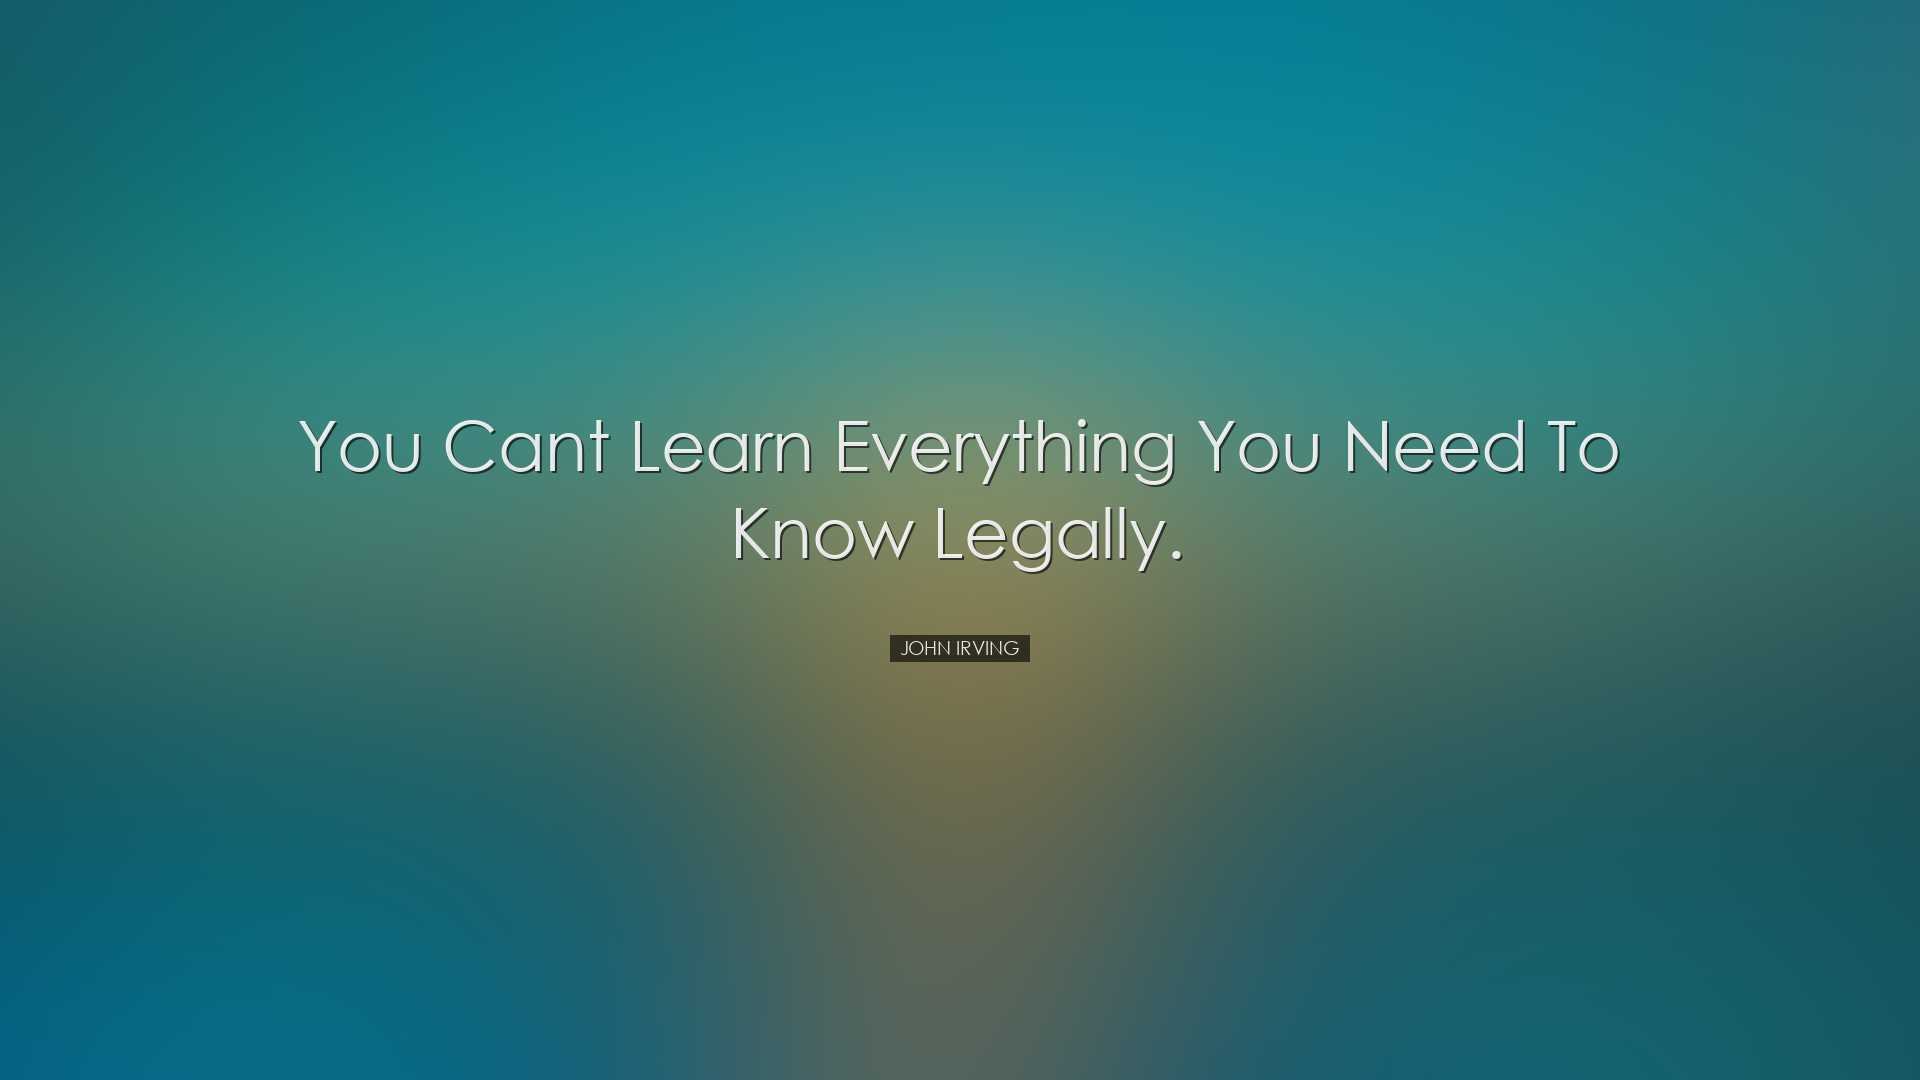 You cant learn everything you need to know legally. - John Irving